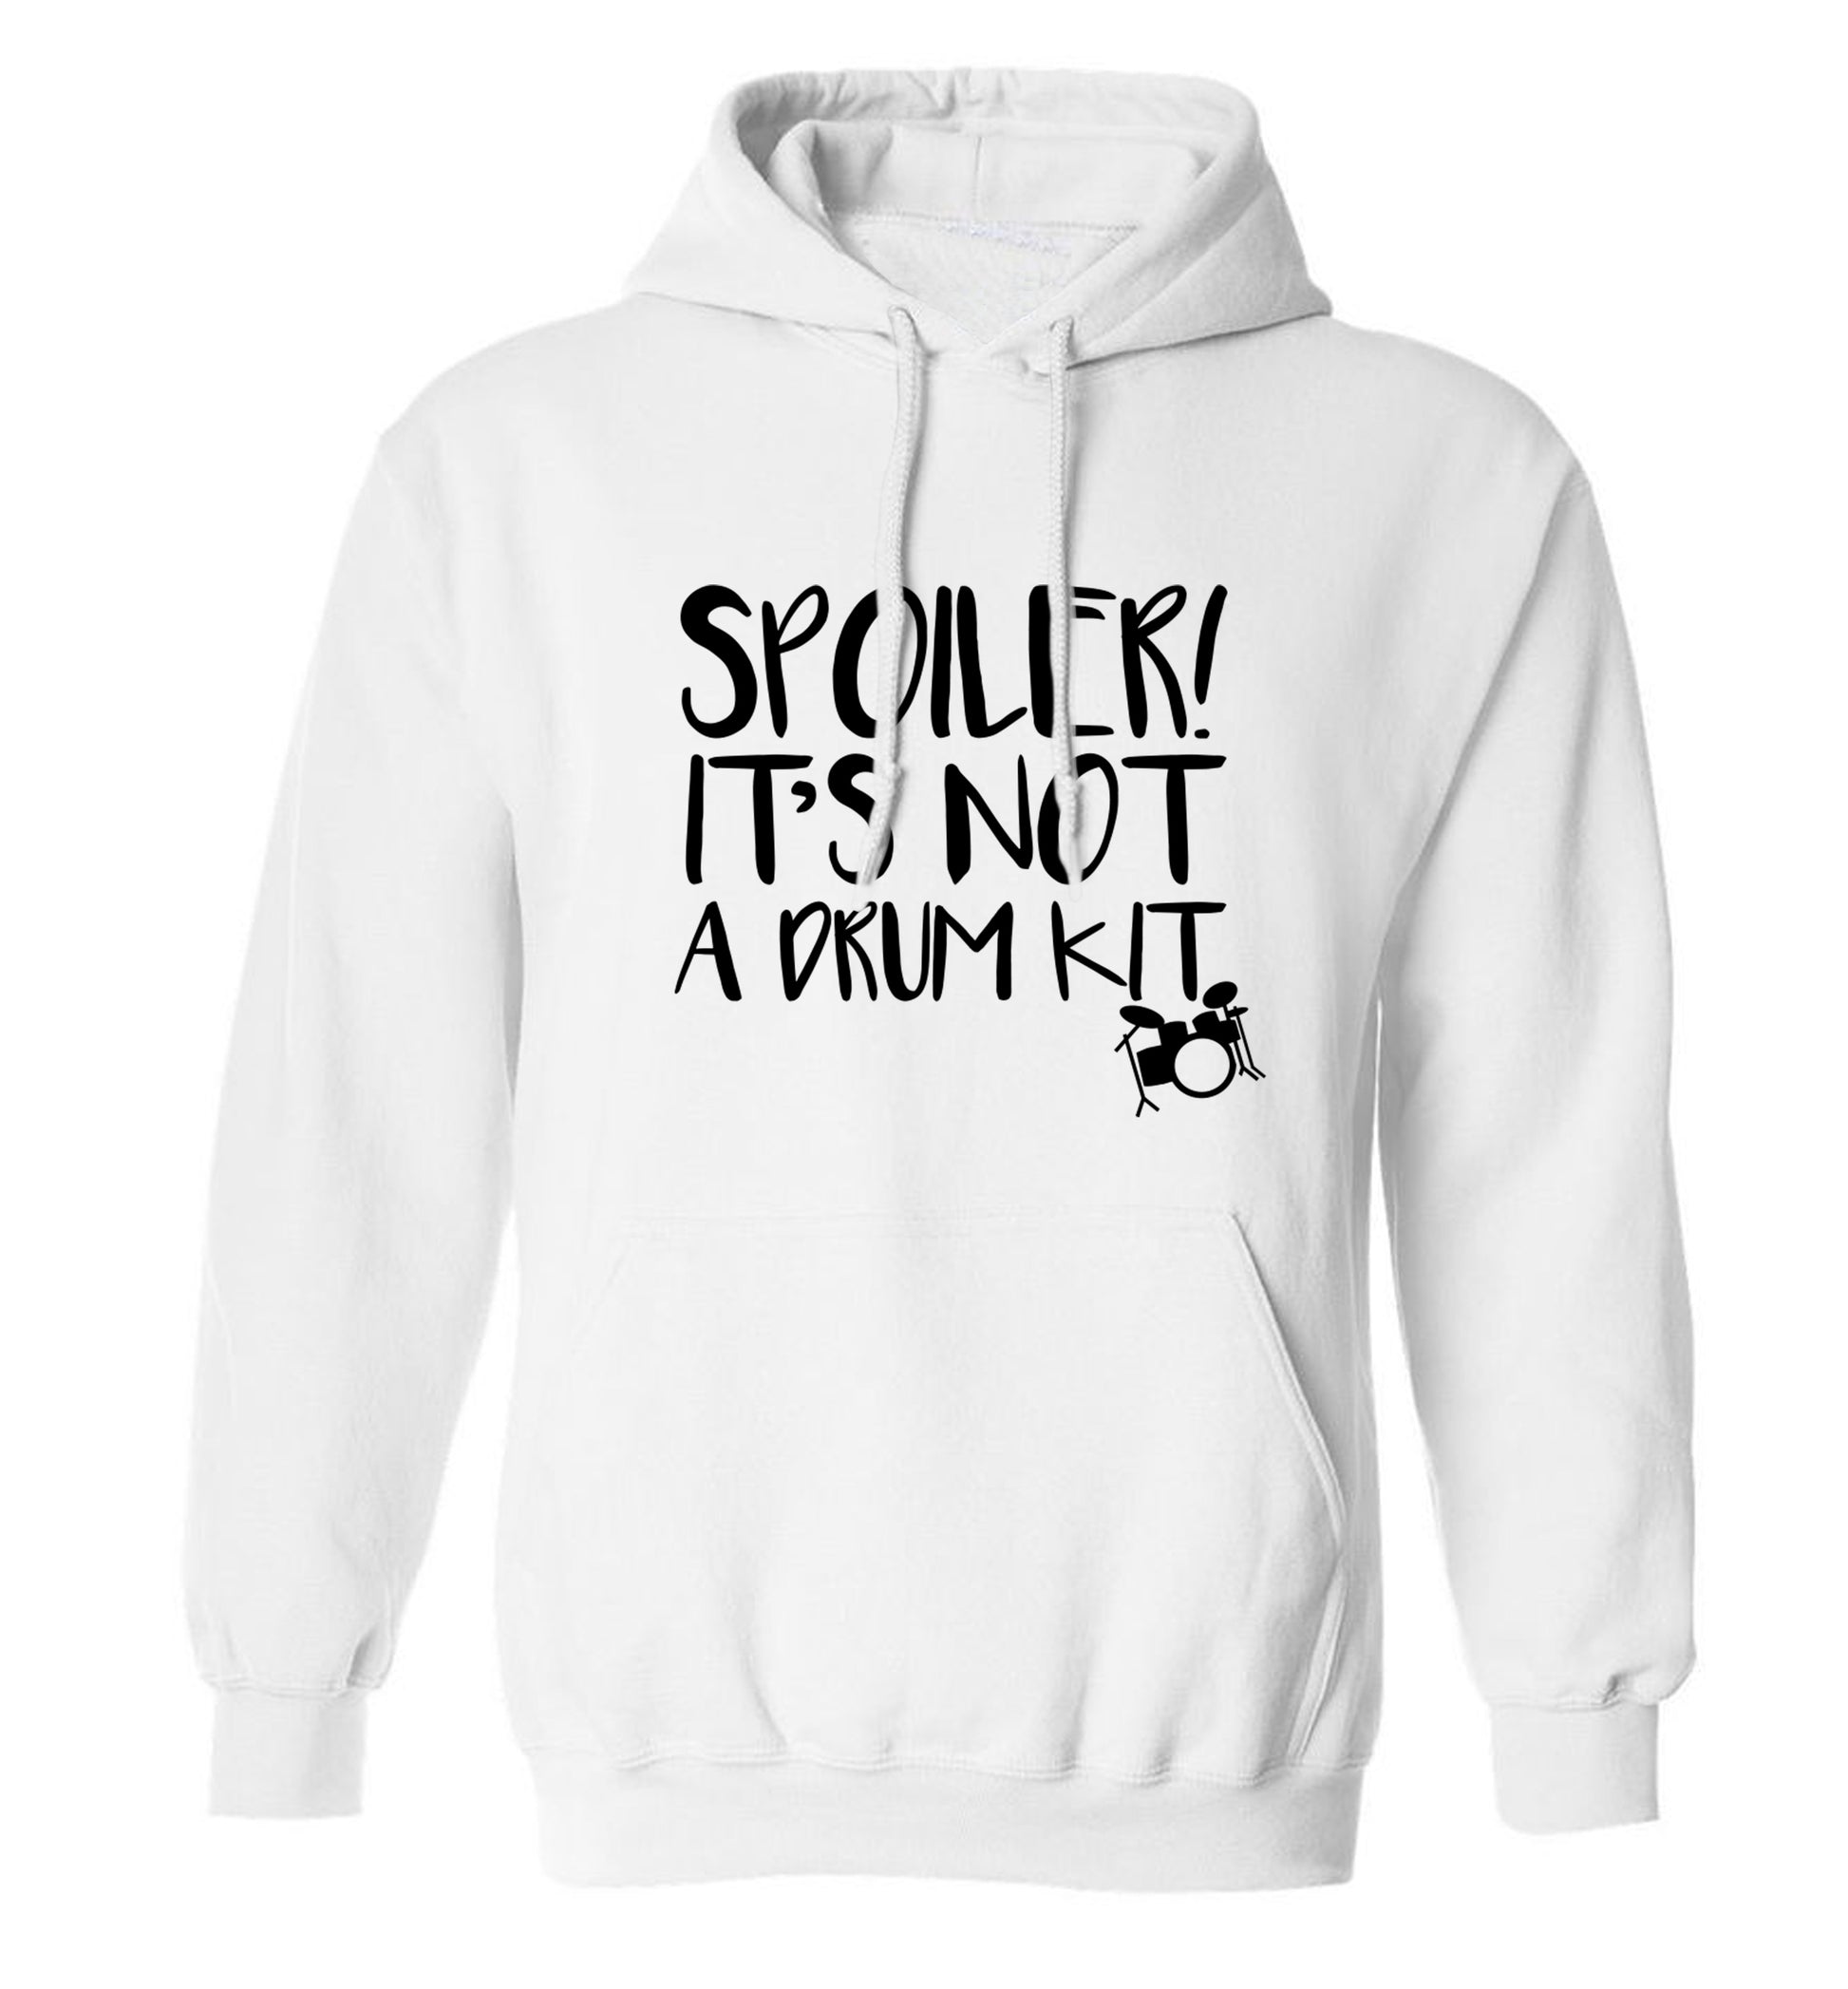 Spoiler it's not a drum kit adults unisex white hoodie 2XL